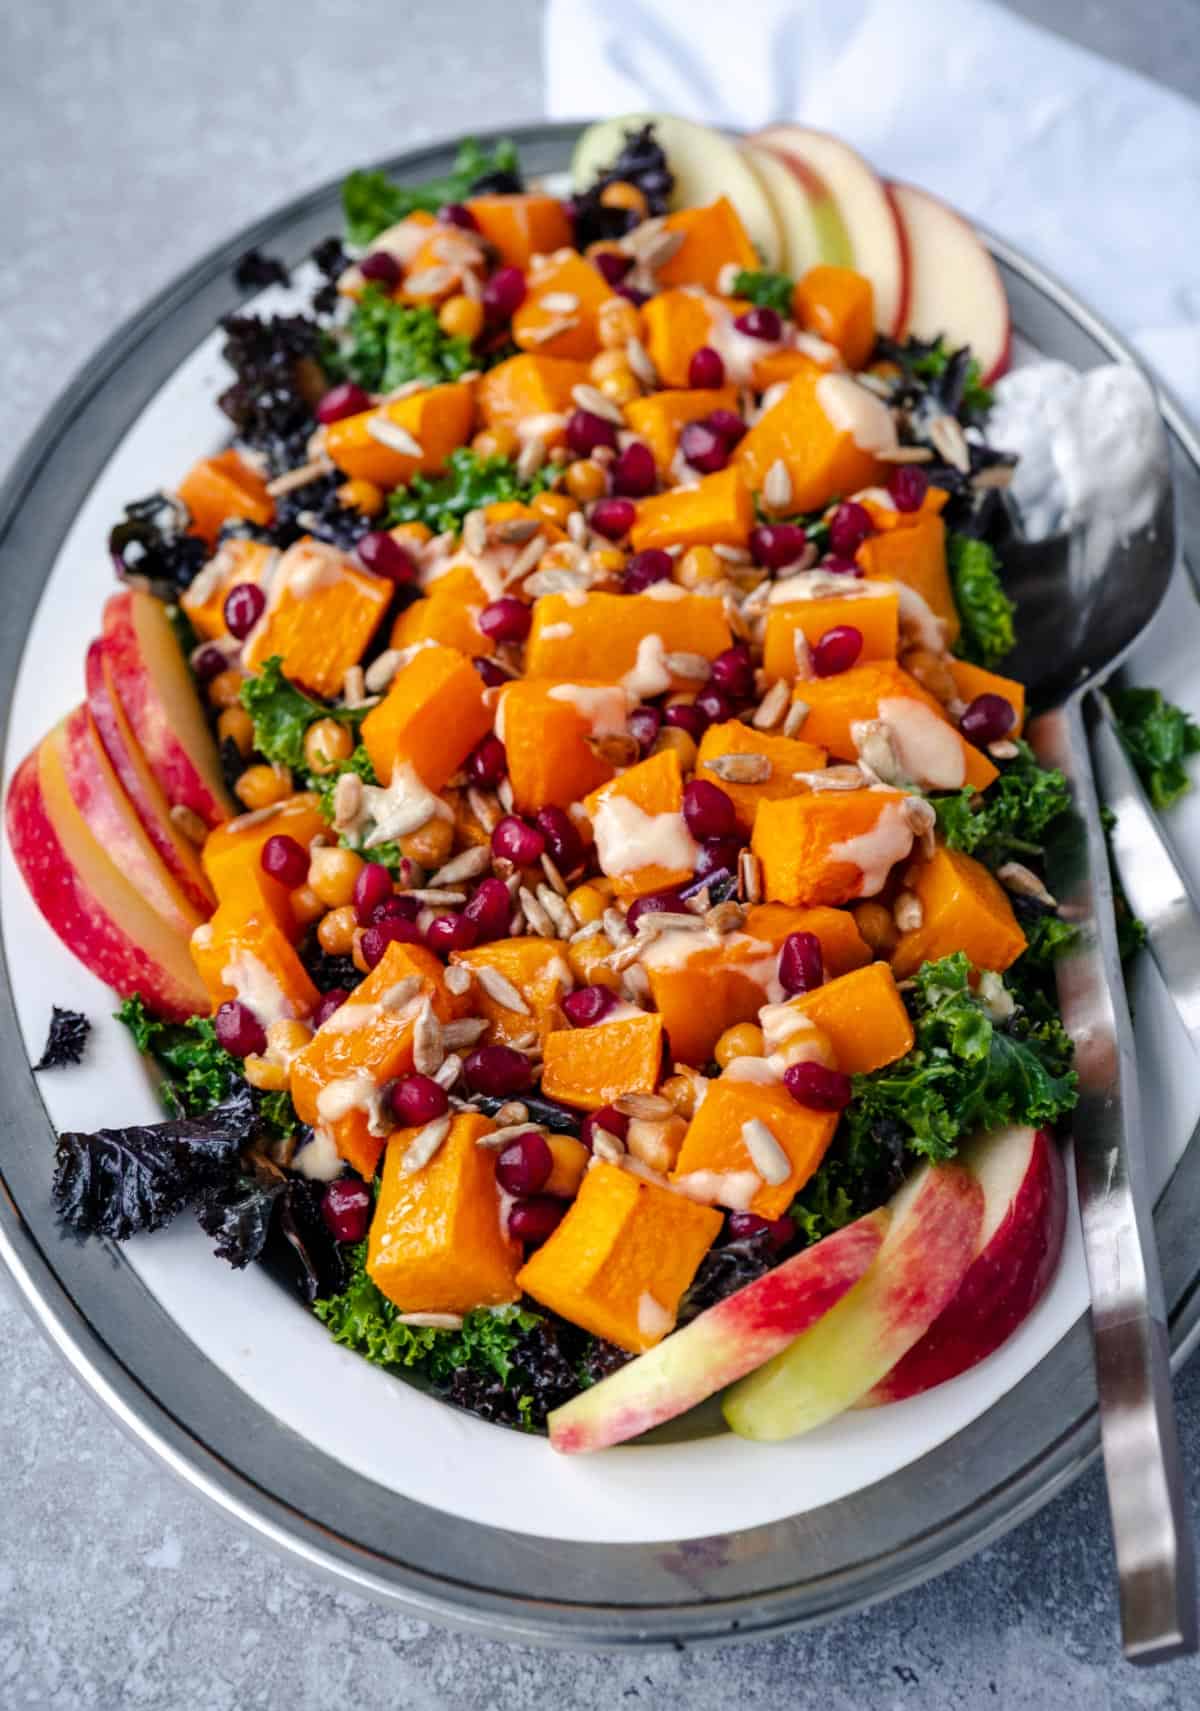 roasted butternut squash, kale and chickpea salad with apple slices, pomegranate and sunflower seeds on a white serve dish